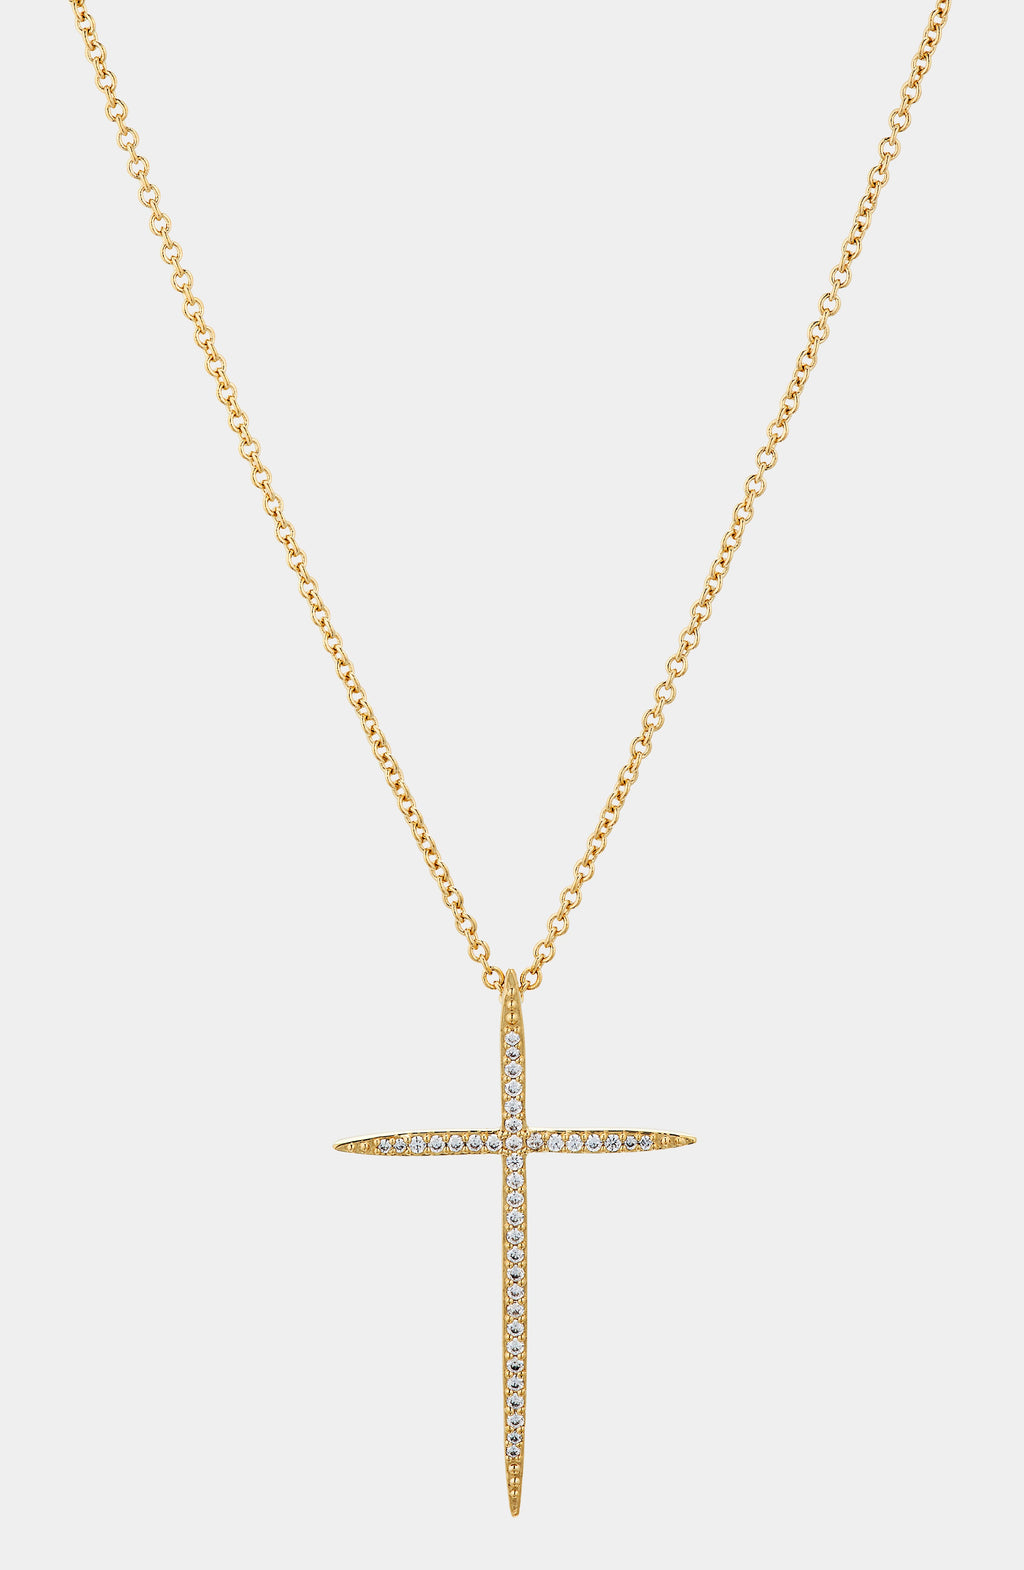 IN THE AIR PAVE CZ CROSS PENDANT NECKLACE